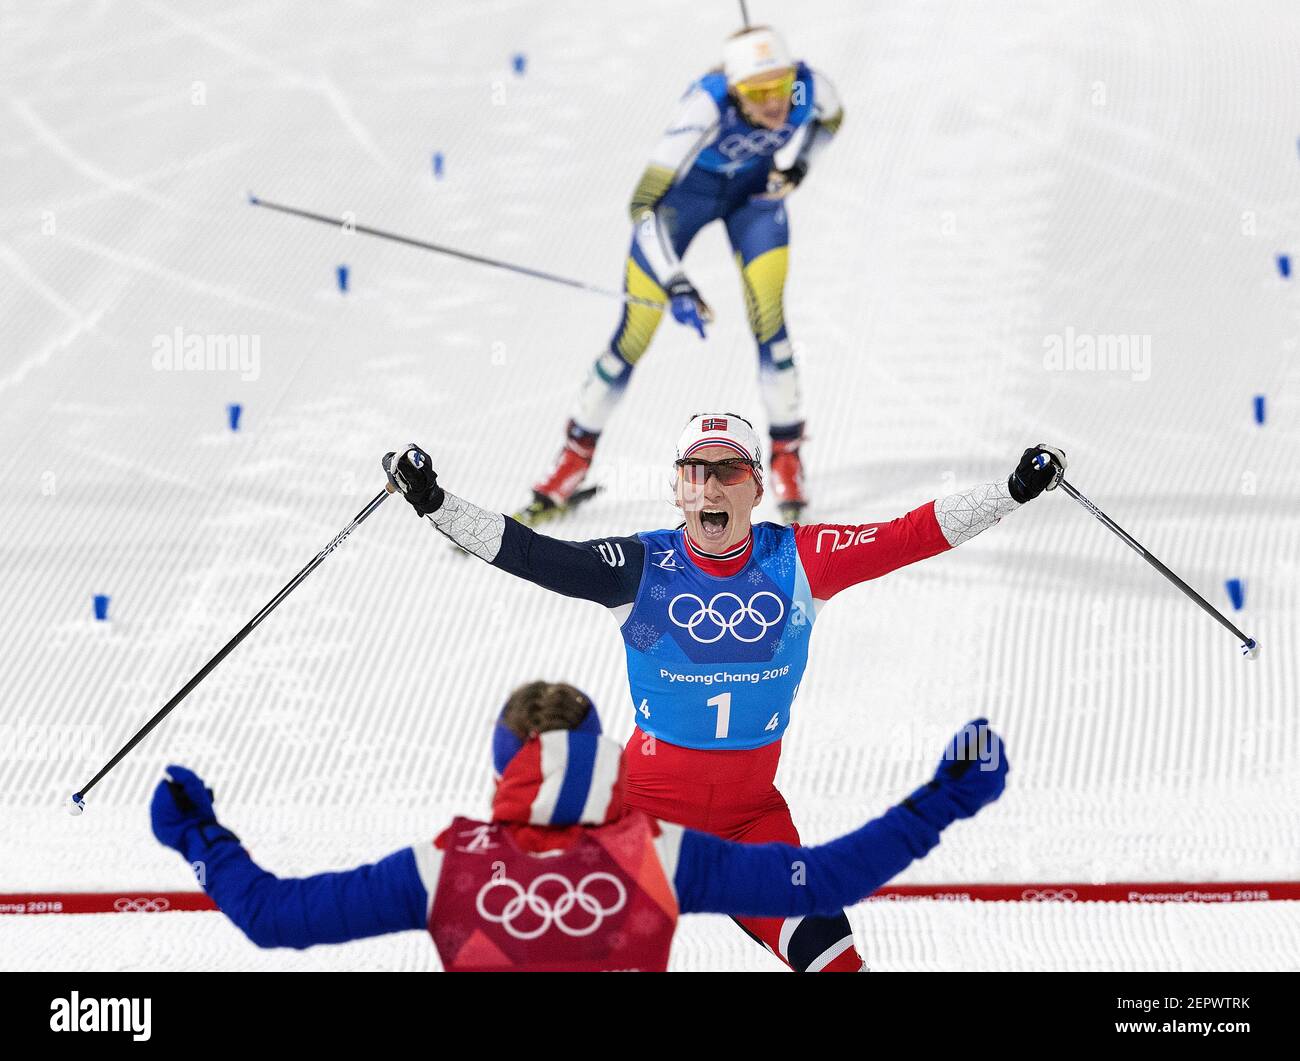 Marit Bjoergen of Norway celebrates after crossing the finish line to win the gold medal during the Women's 4x5km Relay at Alpensia Cross-Country Centre during the Pyeongchang Winter Olympics on Saturday, Feb. 17, 2018. (Photo by Carlos Gonzalez/Minneapolis Star Tribune/TNS/Sipa USA) Stock Photo